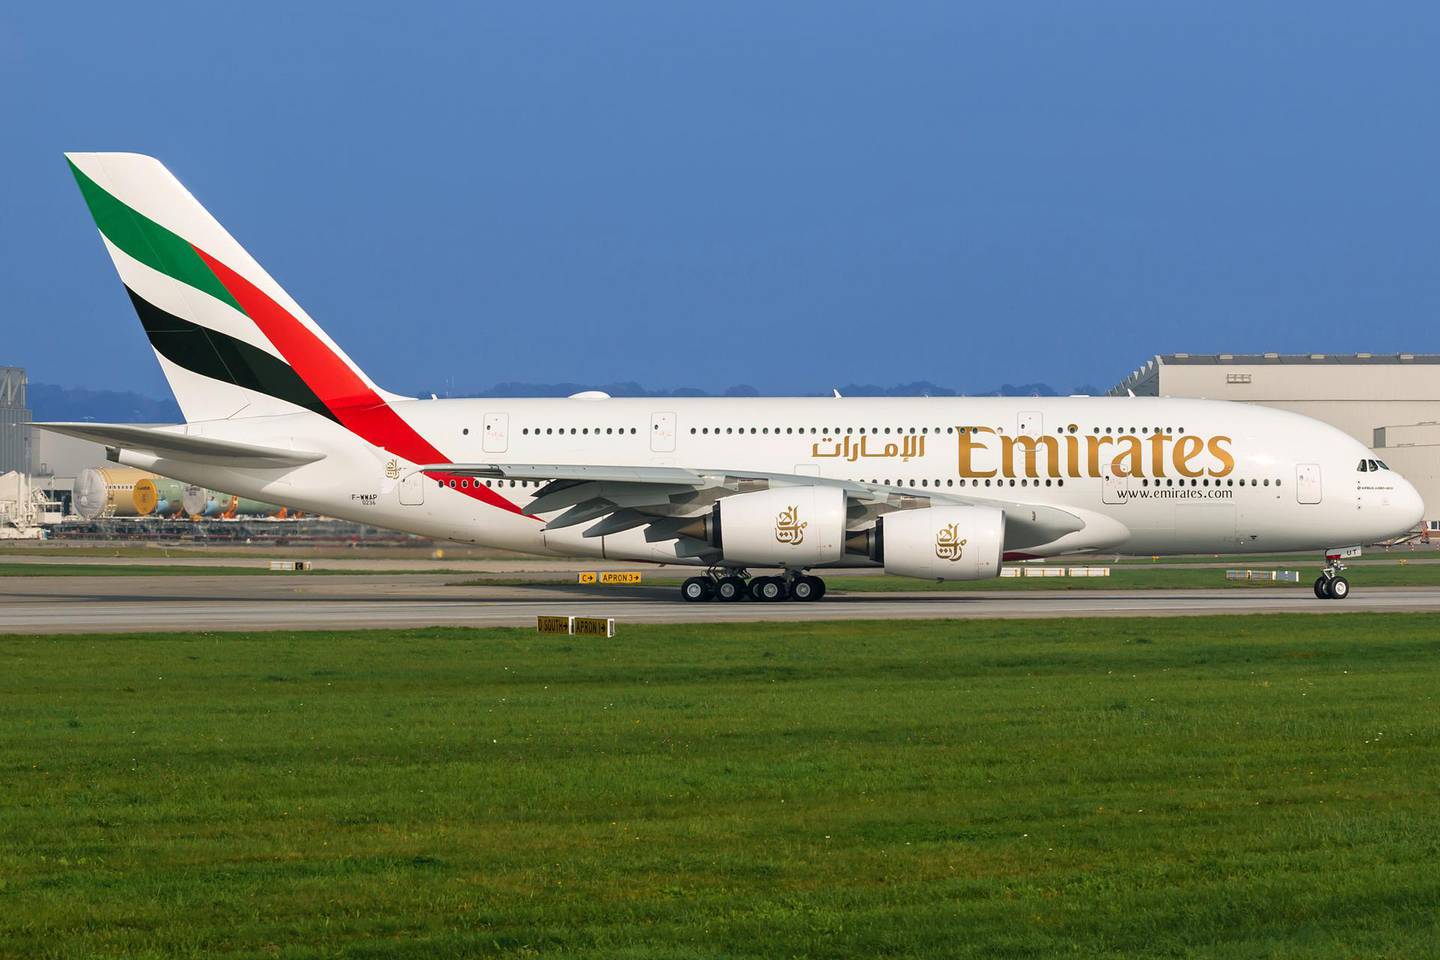 It takes Emirates 18-24 hours to get on of its aircraft ready to fly after being grounded. Courtesy Emirates